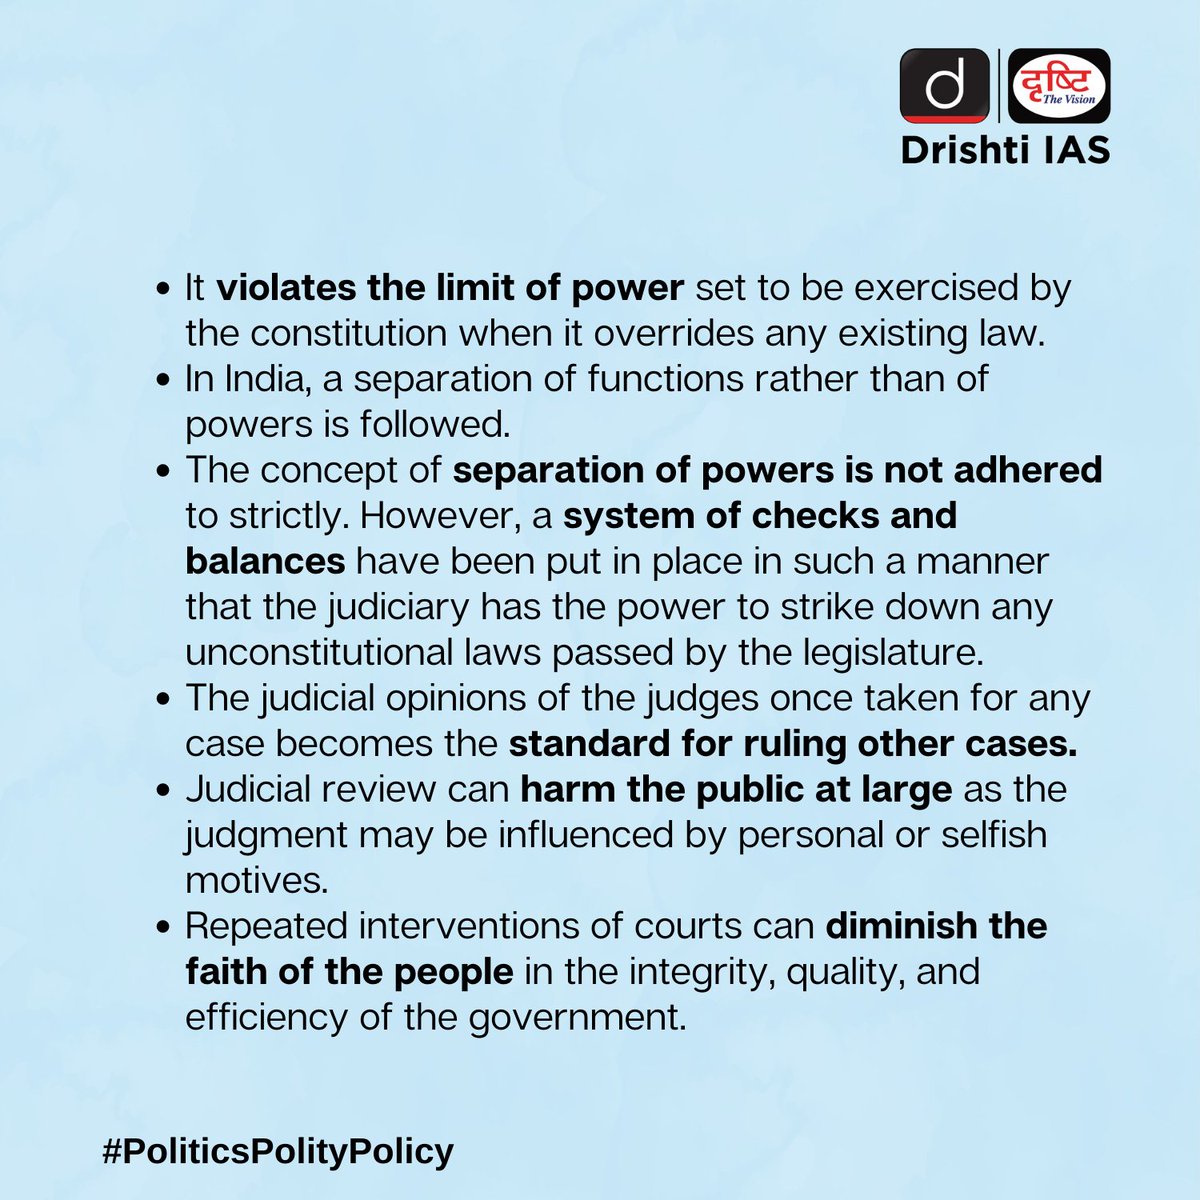 Politics explains the features of policy, outlines the rights of the polity and seeks to cover gaps. Read to engage with #PoliticsPolityPolicy. 
  
#DrishtiGuideToGS #Polity #InternationalRelations #PSIR #UPSC #IAS #CSE #PCS #UPSCPrelims #DrishtiIAS #DrishtiIASEnglish